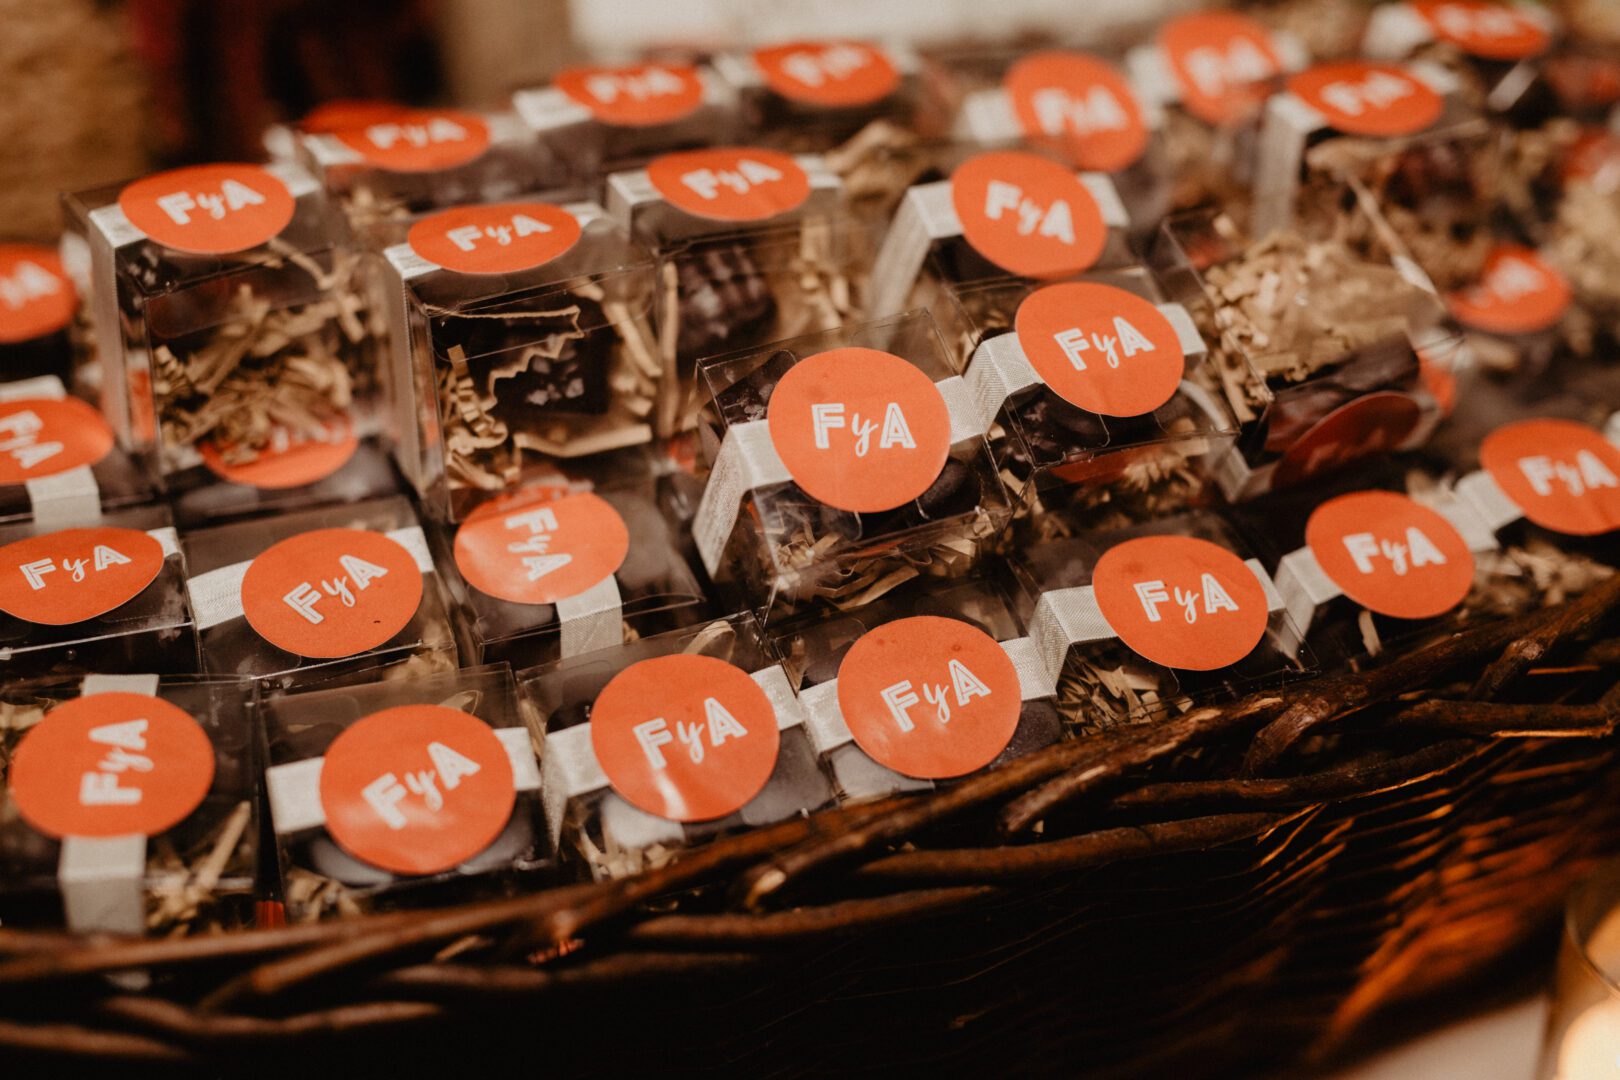 A wicker basket full of chocolates with labels on them.